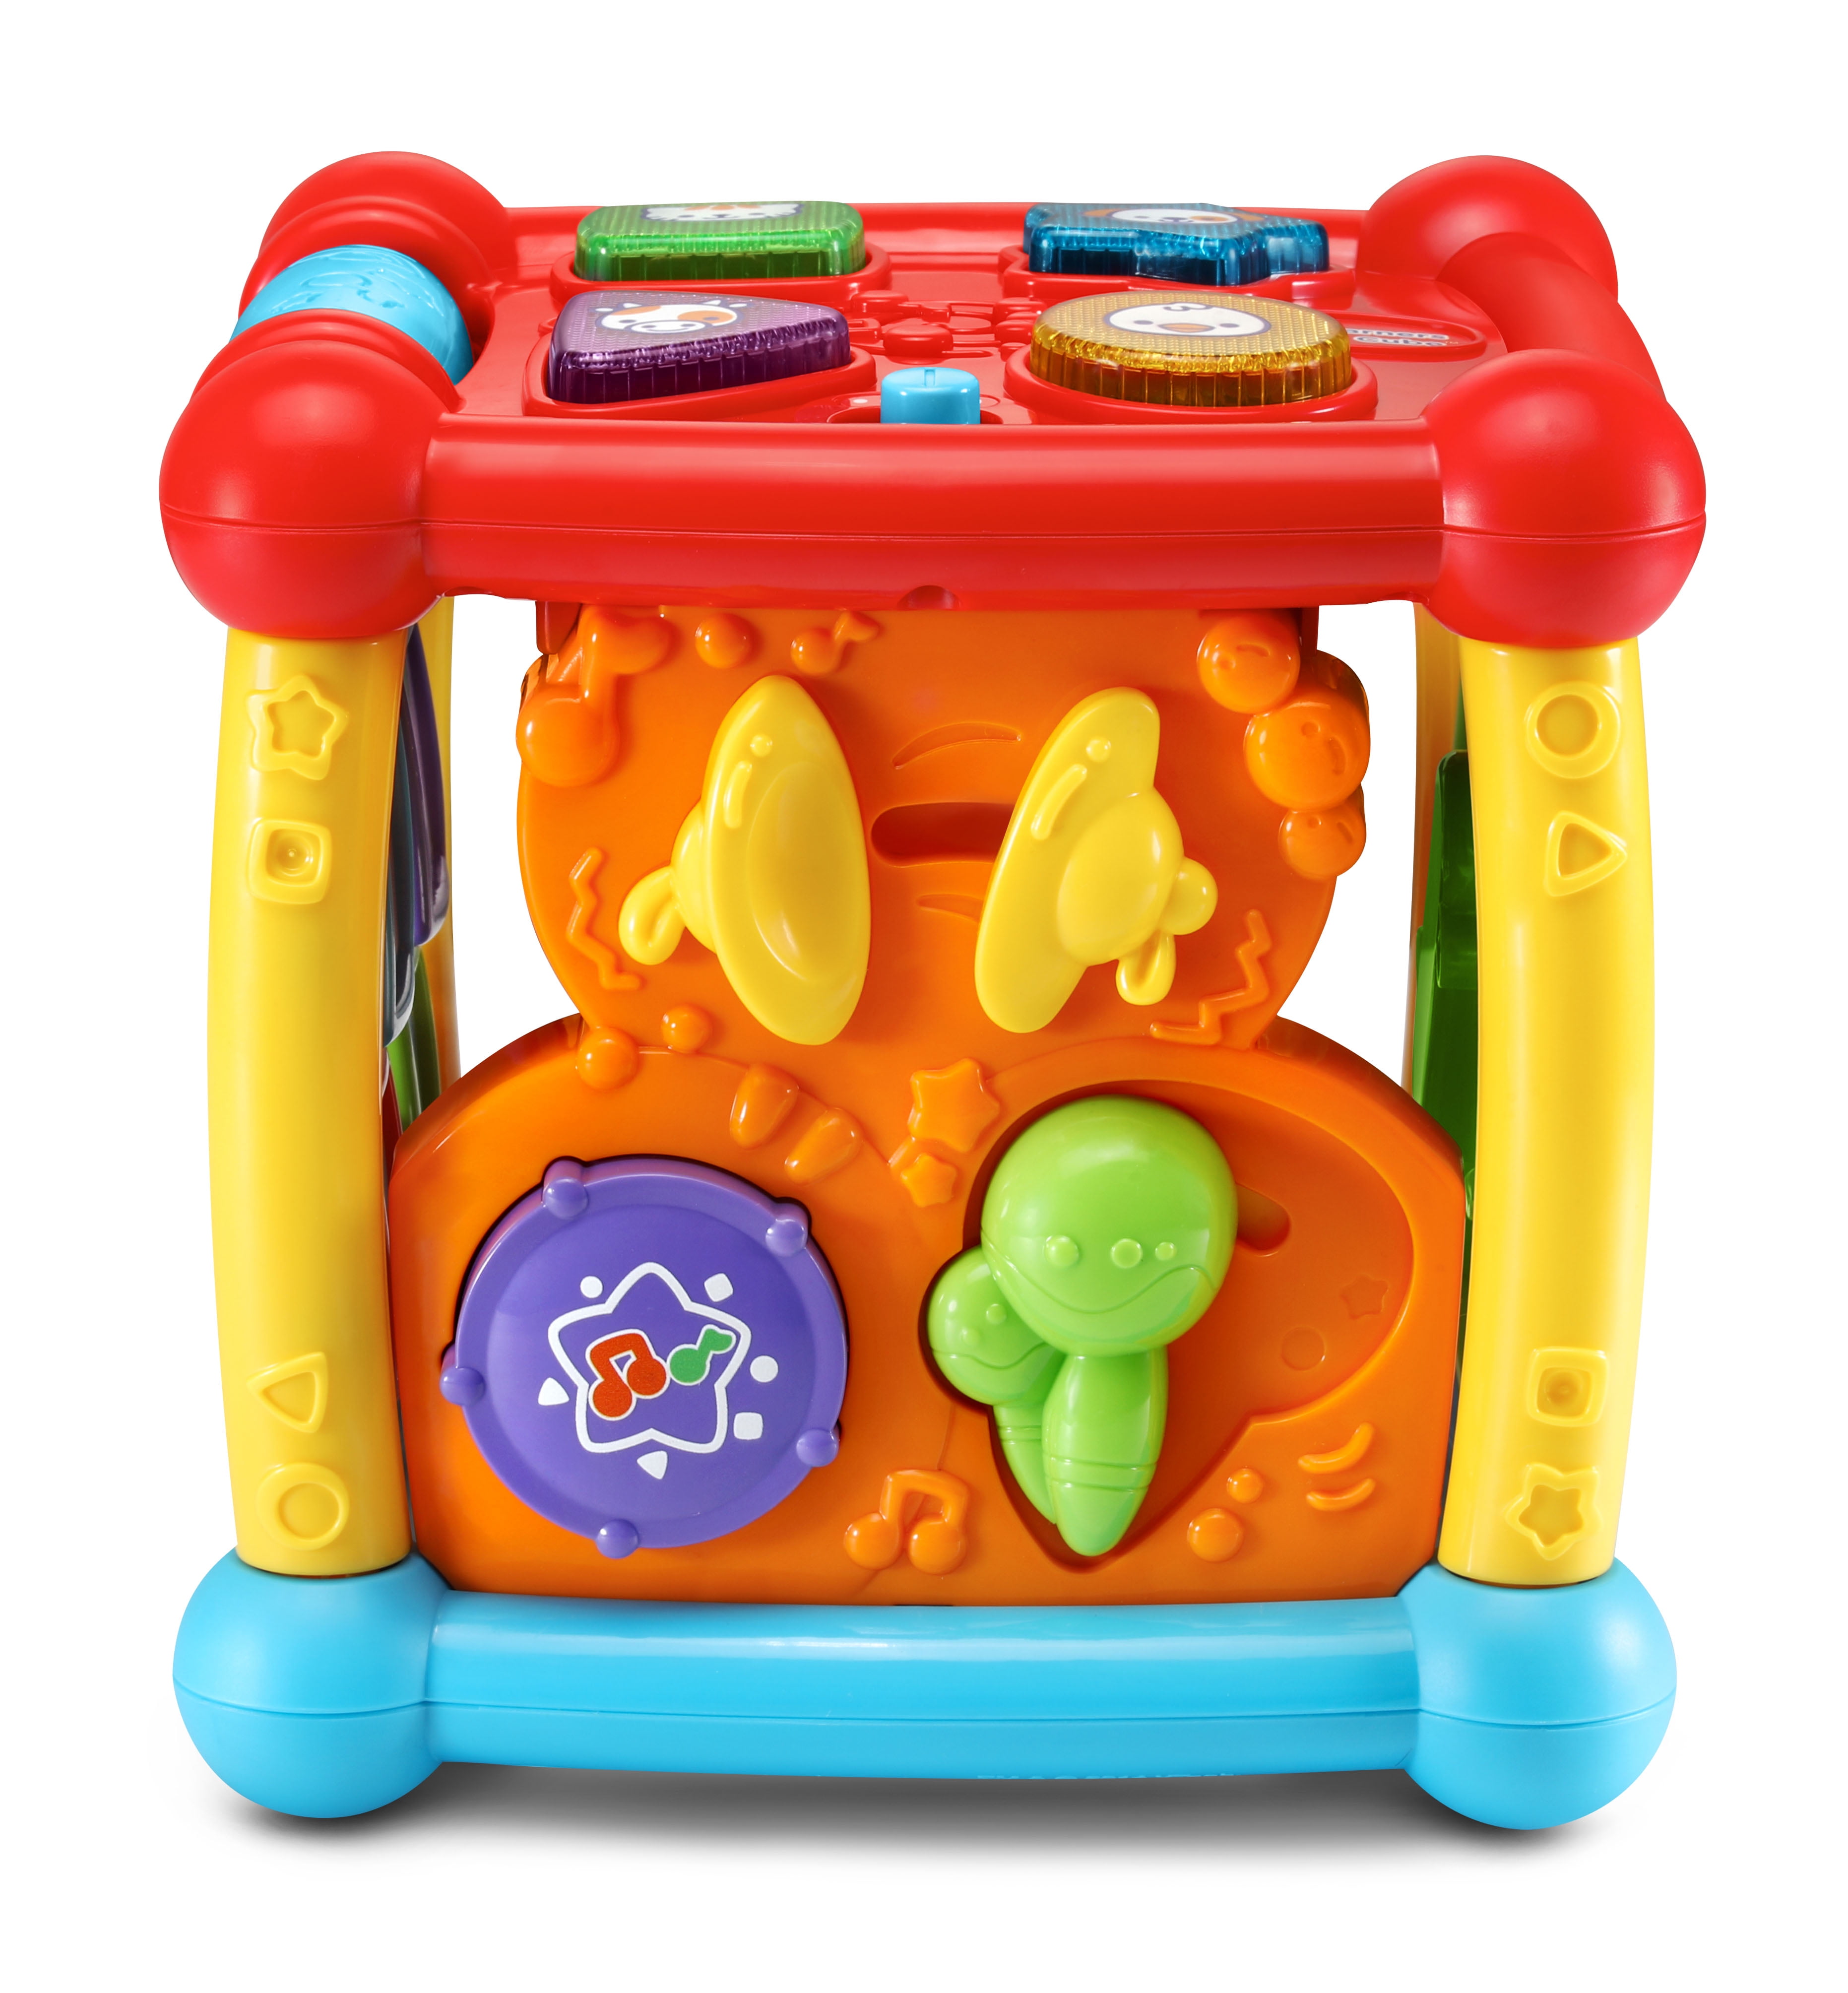 Vtech Baby Discovery Cube Toy 26 Letters Musical Preschool Infant Activity Toys 